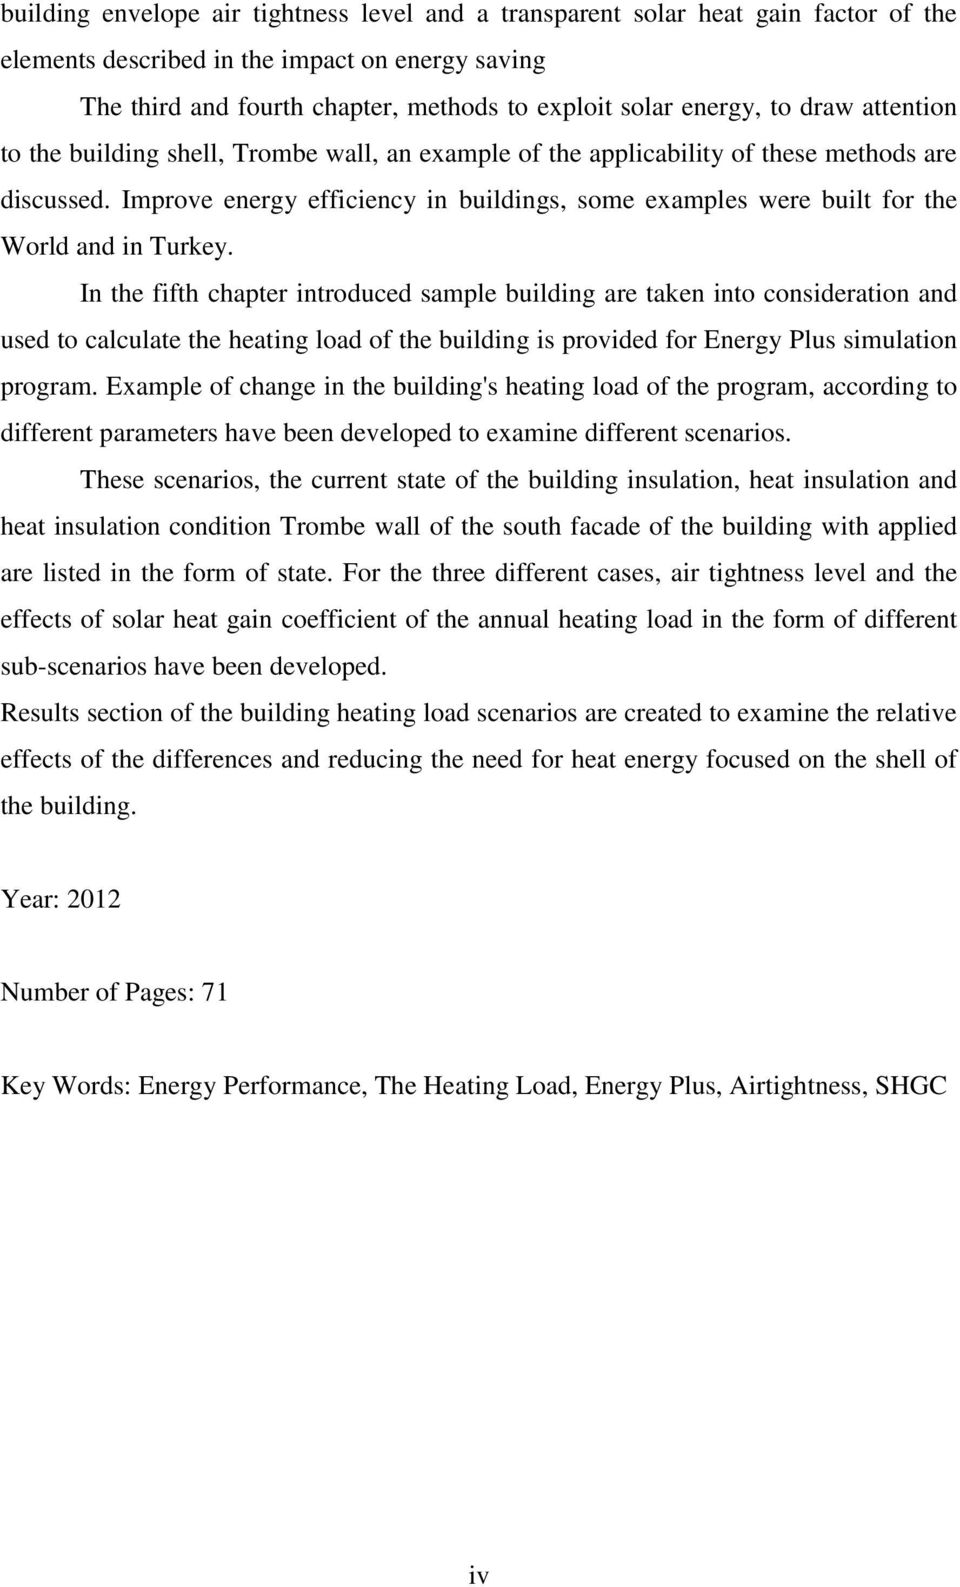 Improve energy efficiency in buildings, some examples were built for the World and in Turkey.